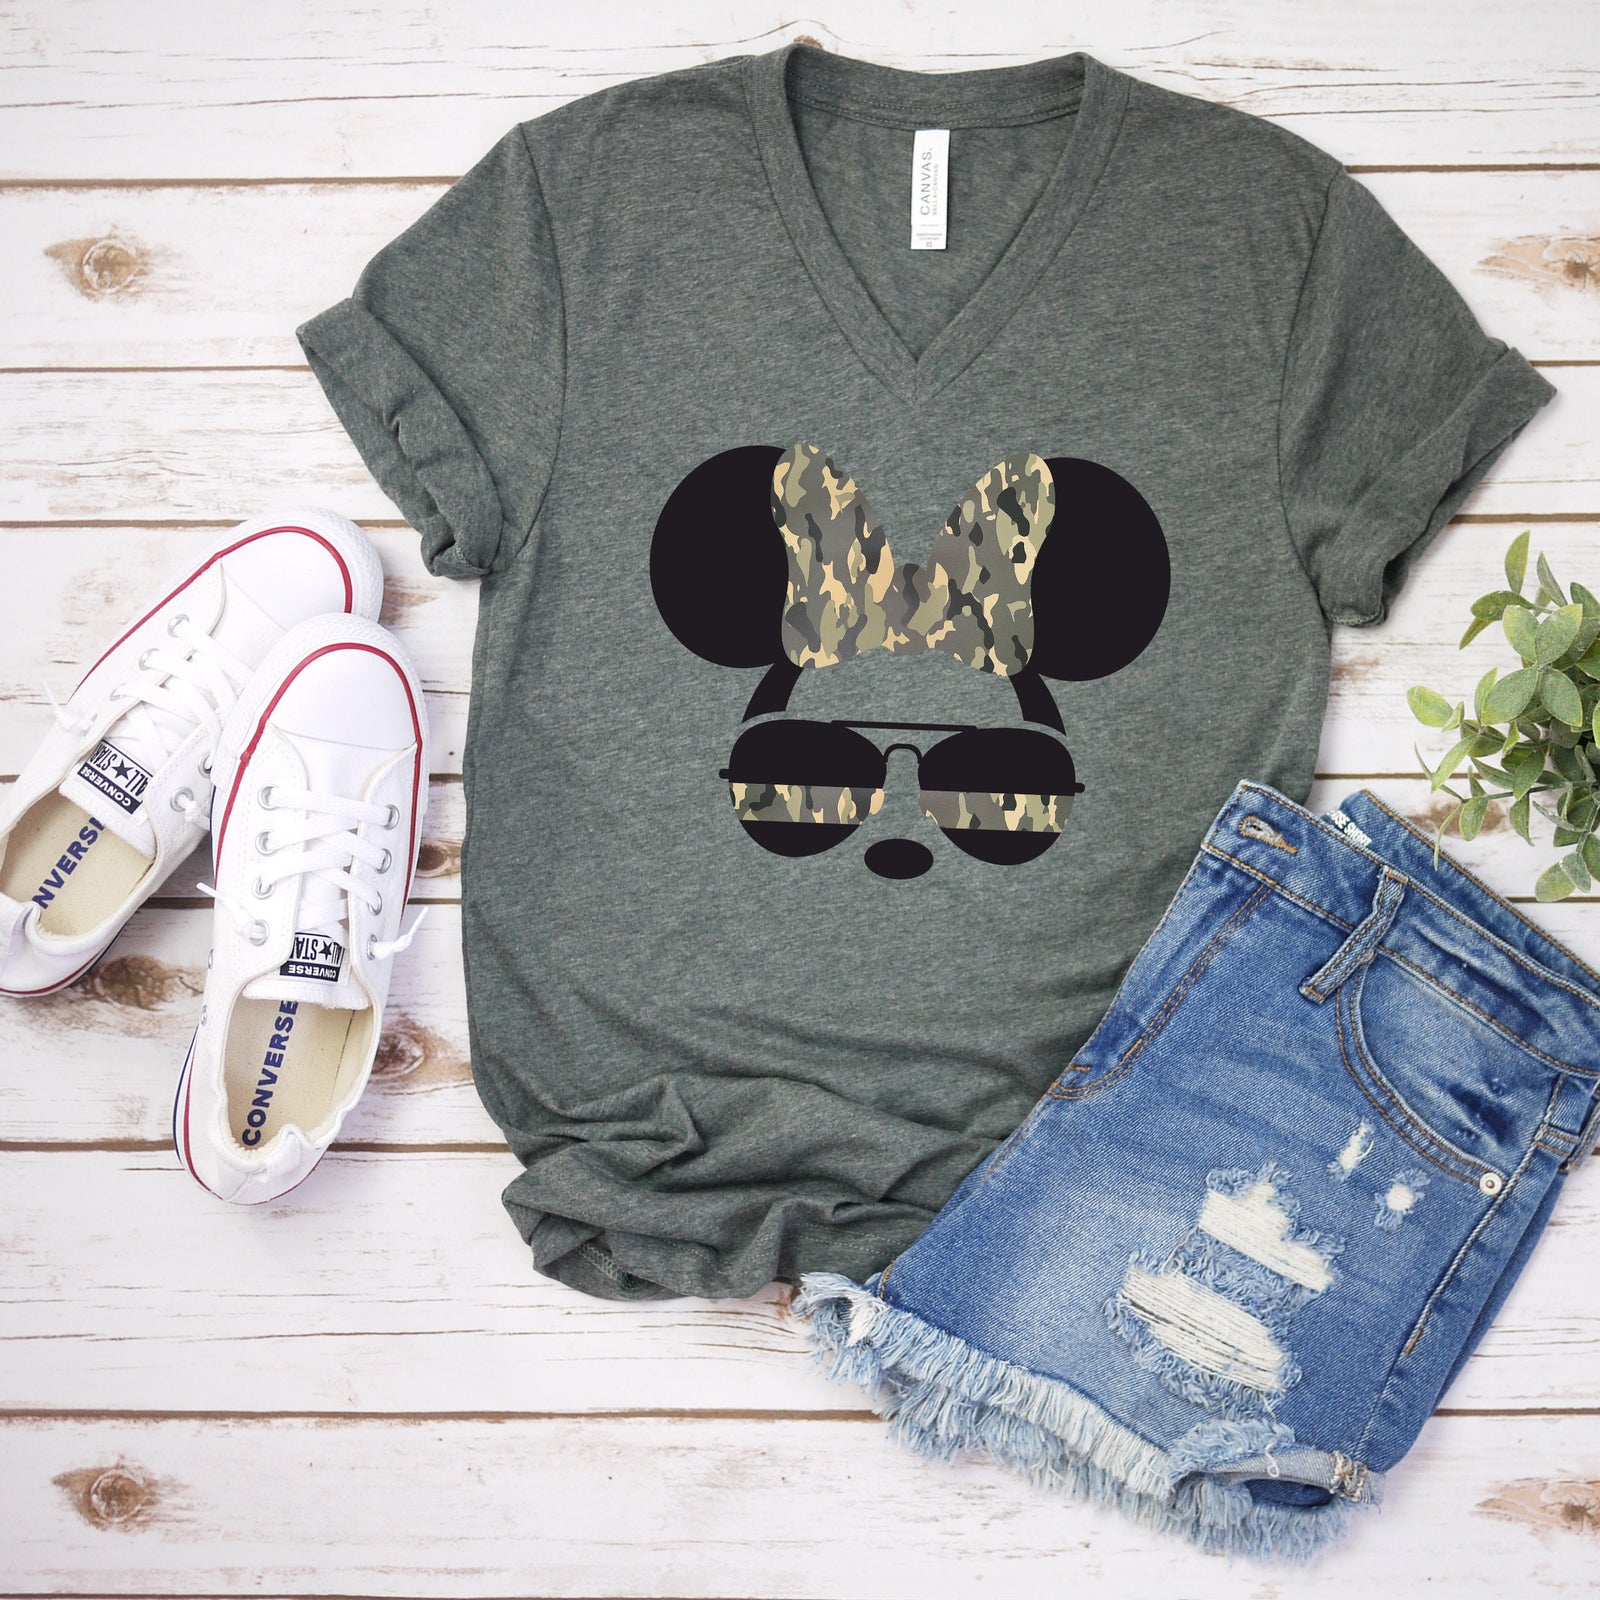 Minnie Army Camouflaged Aviator Glasses - Adult Unisex T shirt -  Armed Forces - Military - Minnie Mouse T Shirt